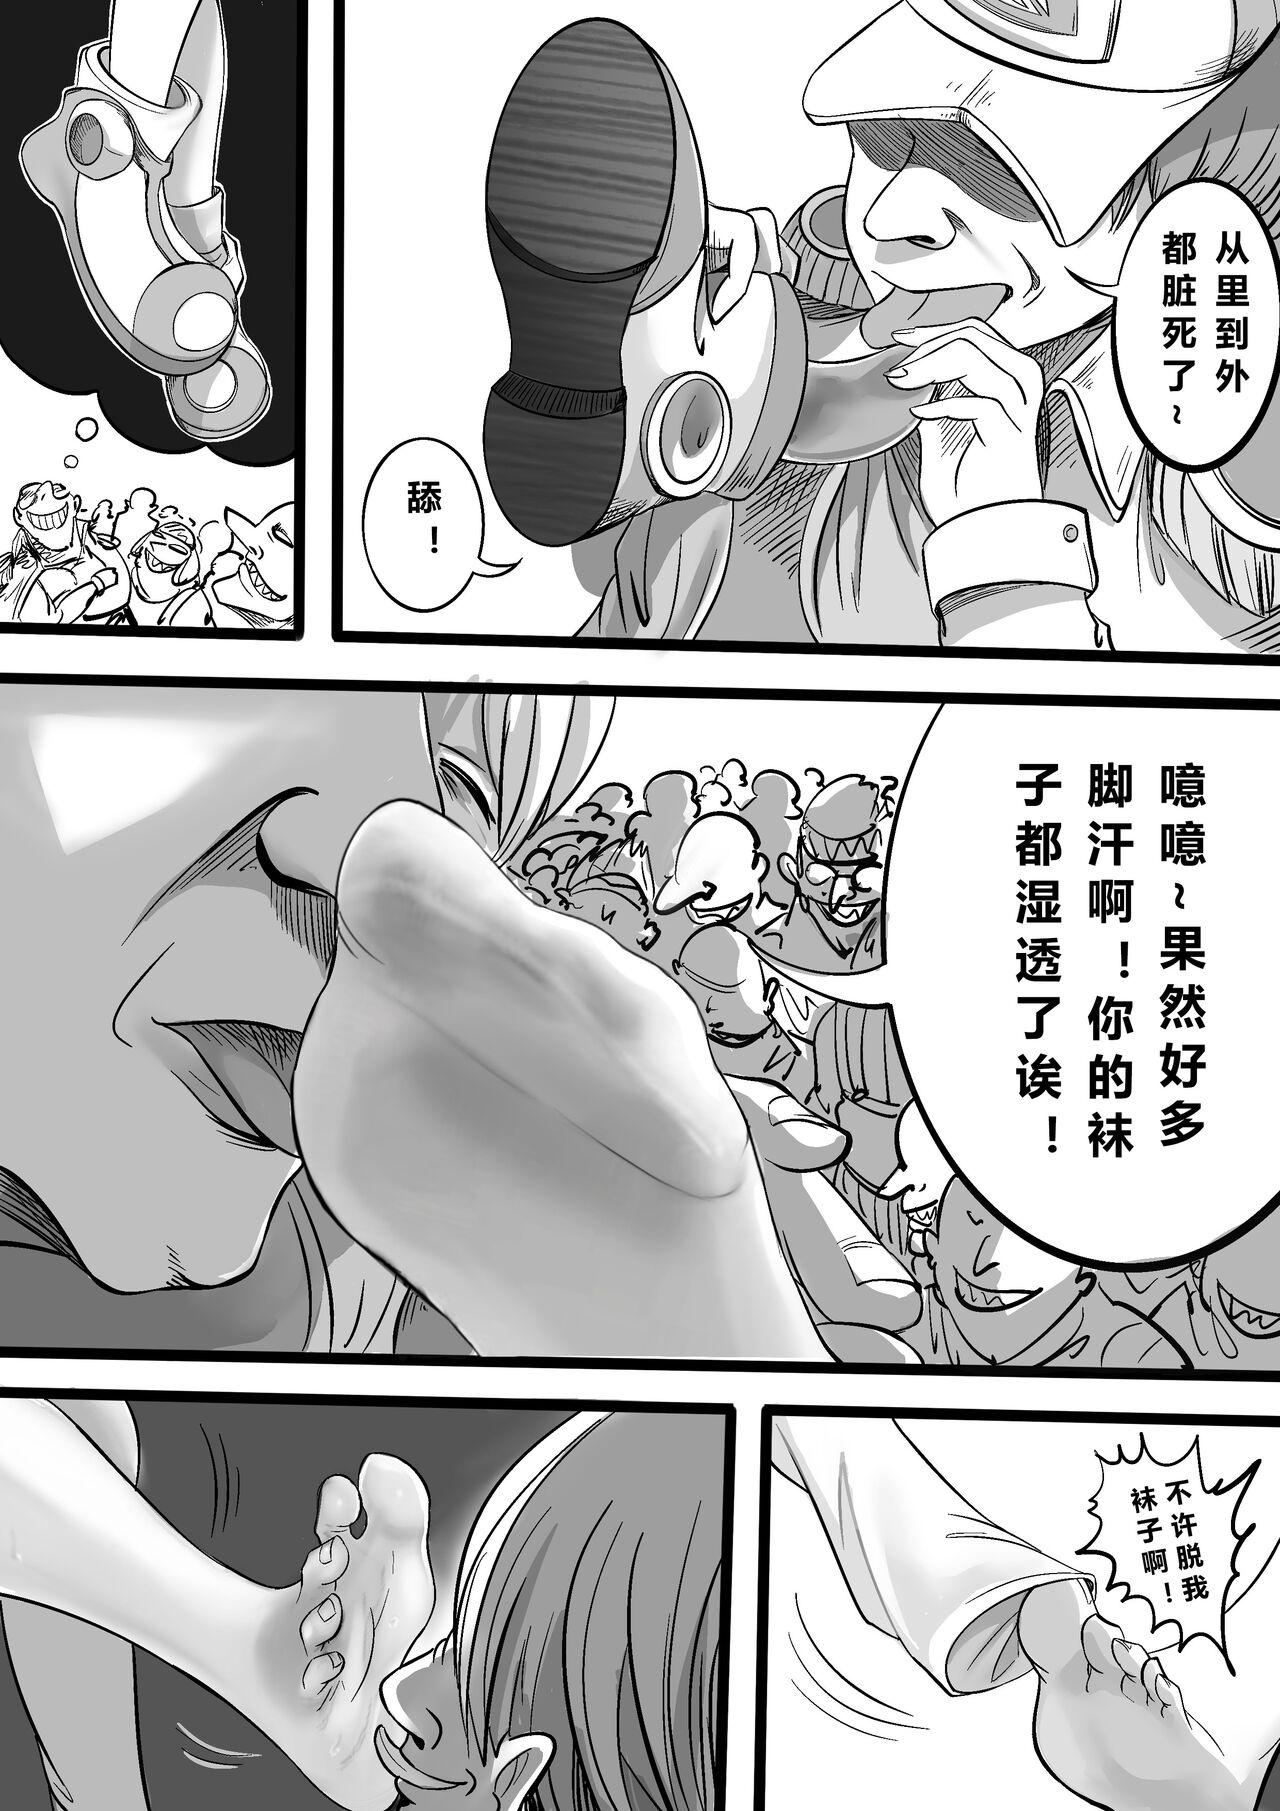 Nice Tits ONE PIECE 歌之魔女的监禁篇 - One piece Rough Porn - Page 5